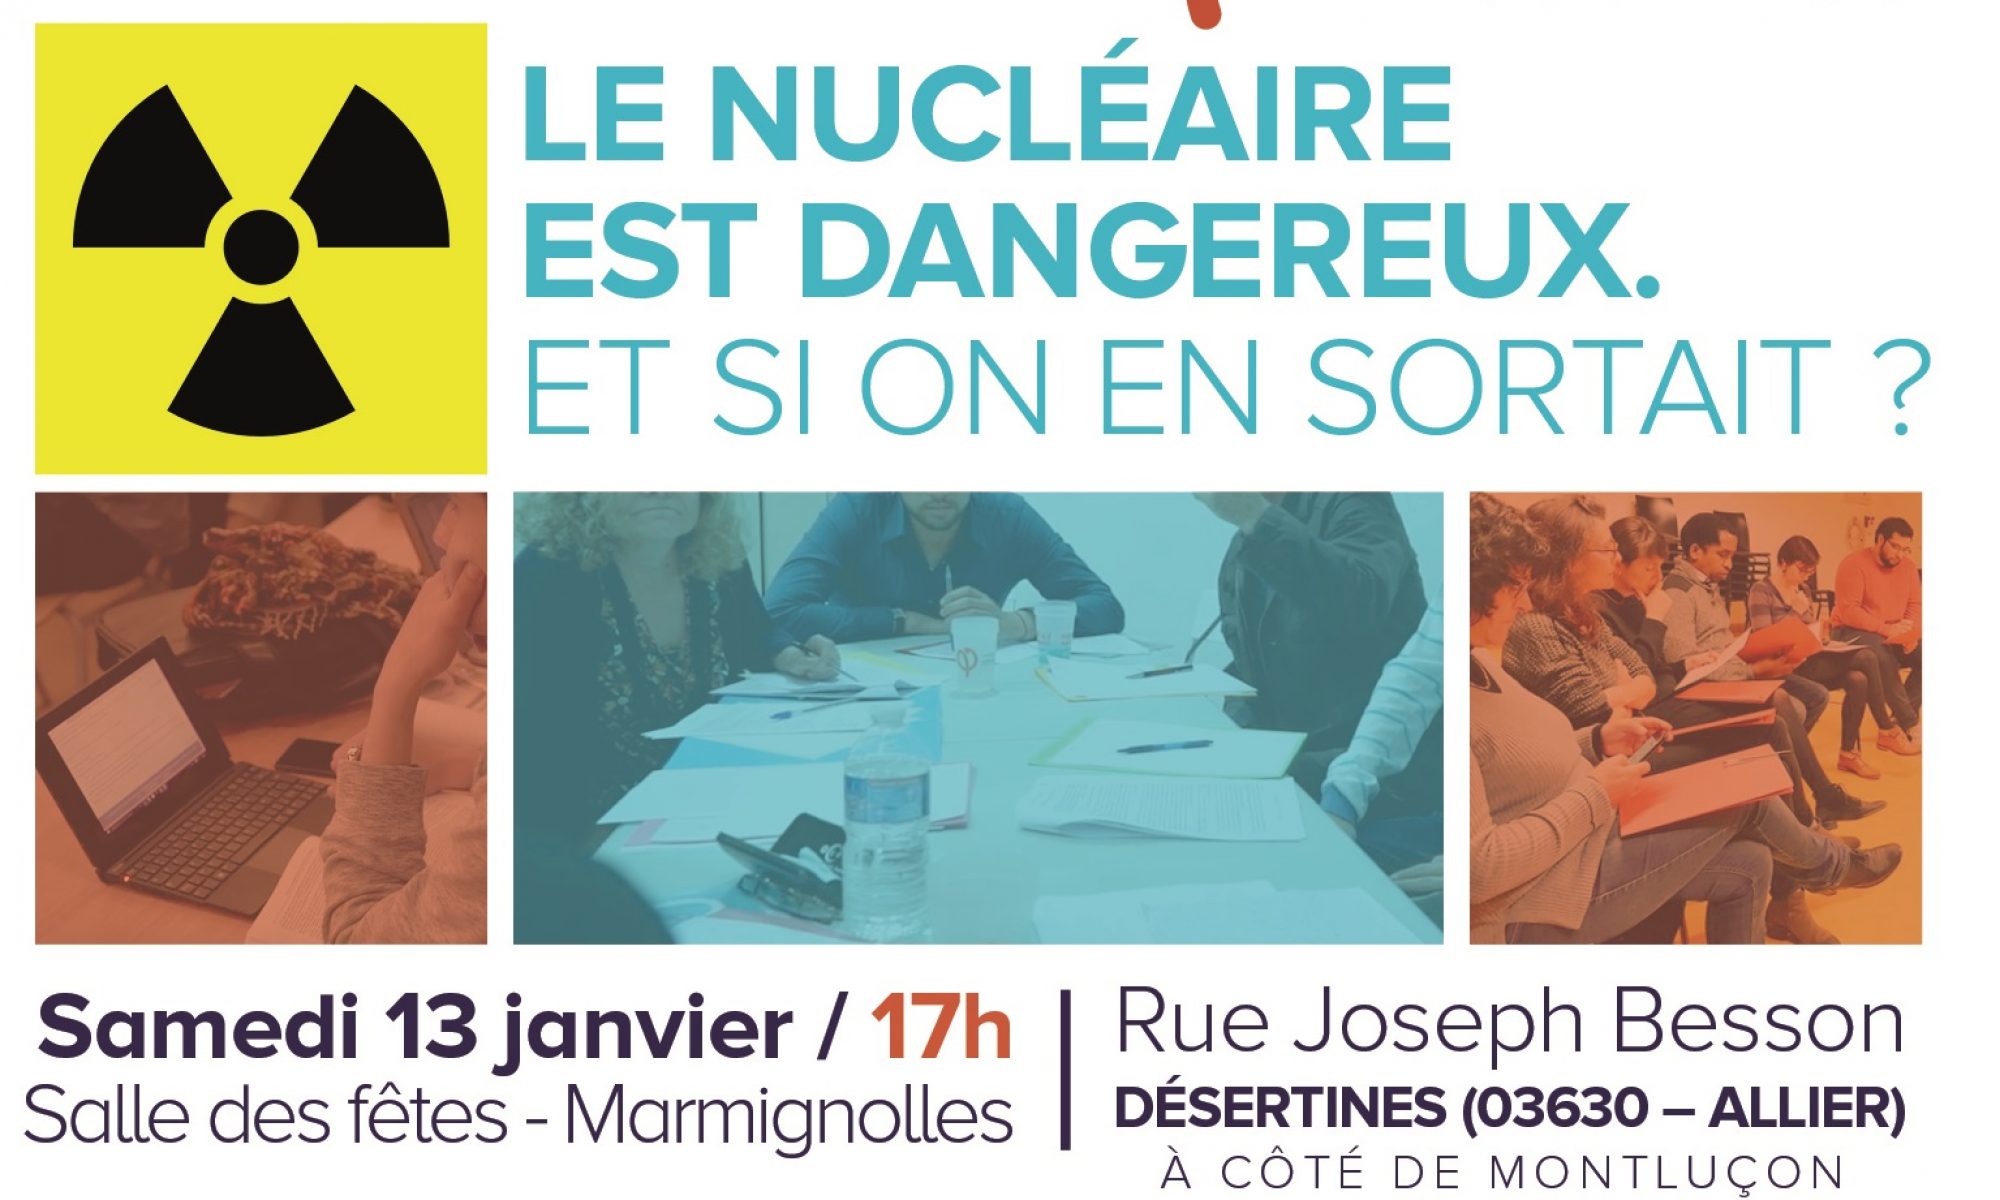 ADL_Nucleaire désertines